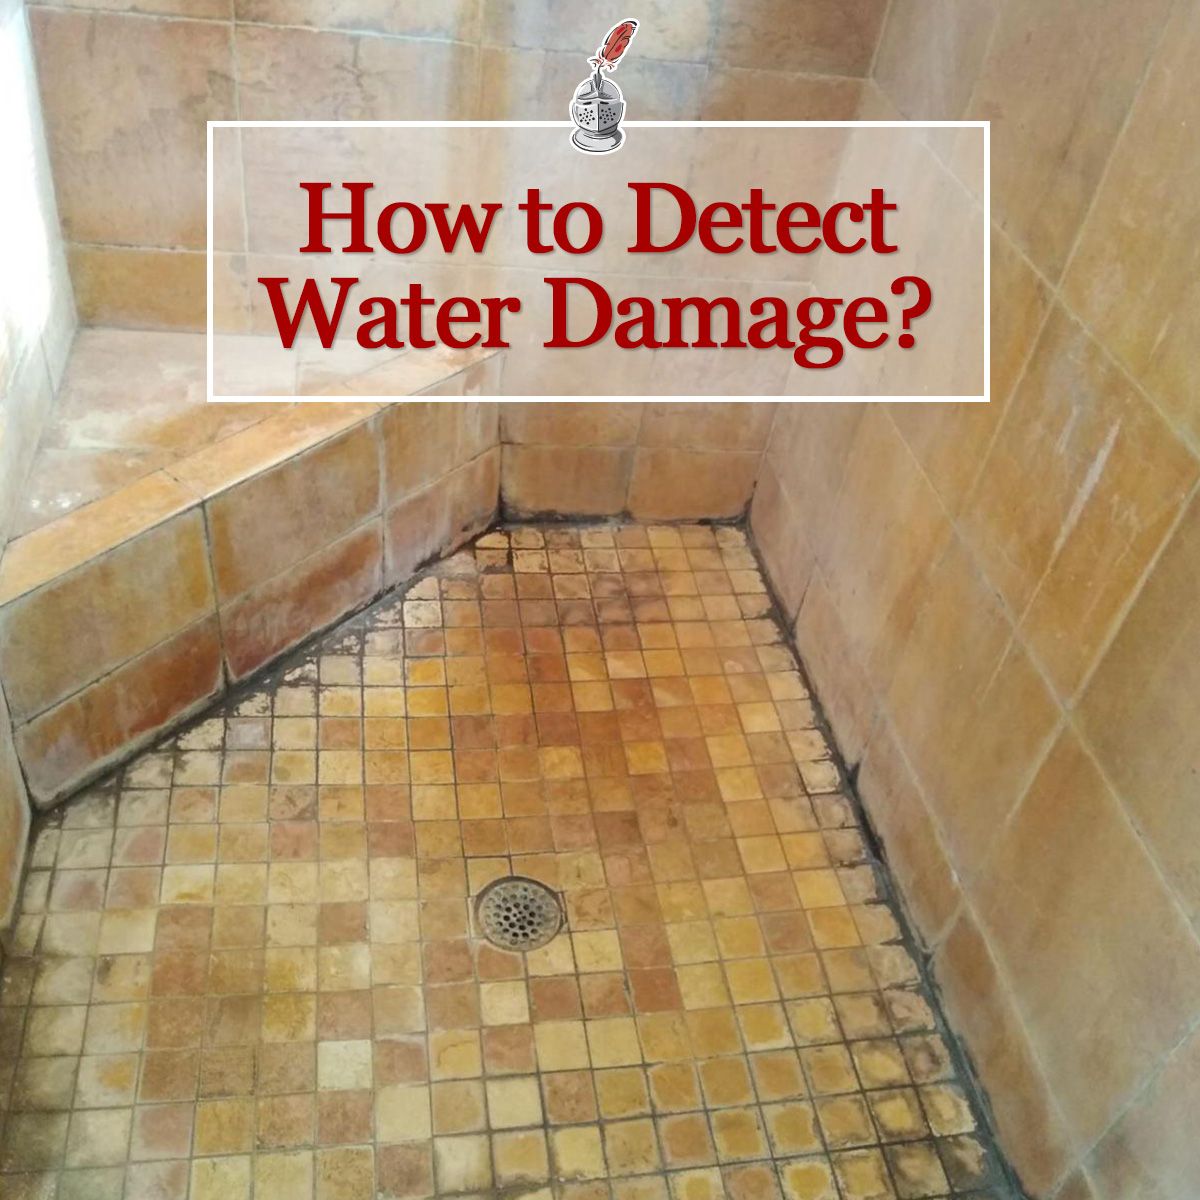 How to Detect Water Damage